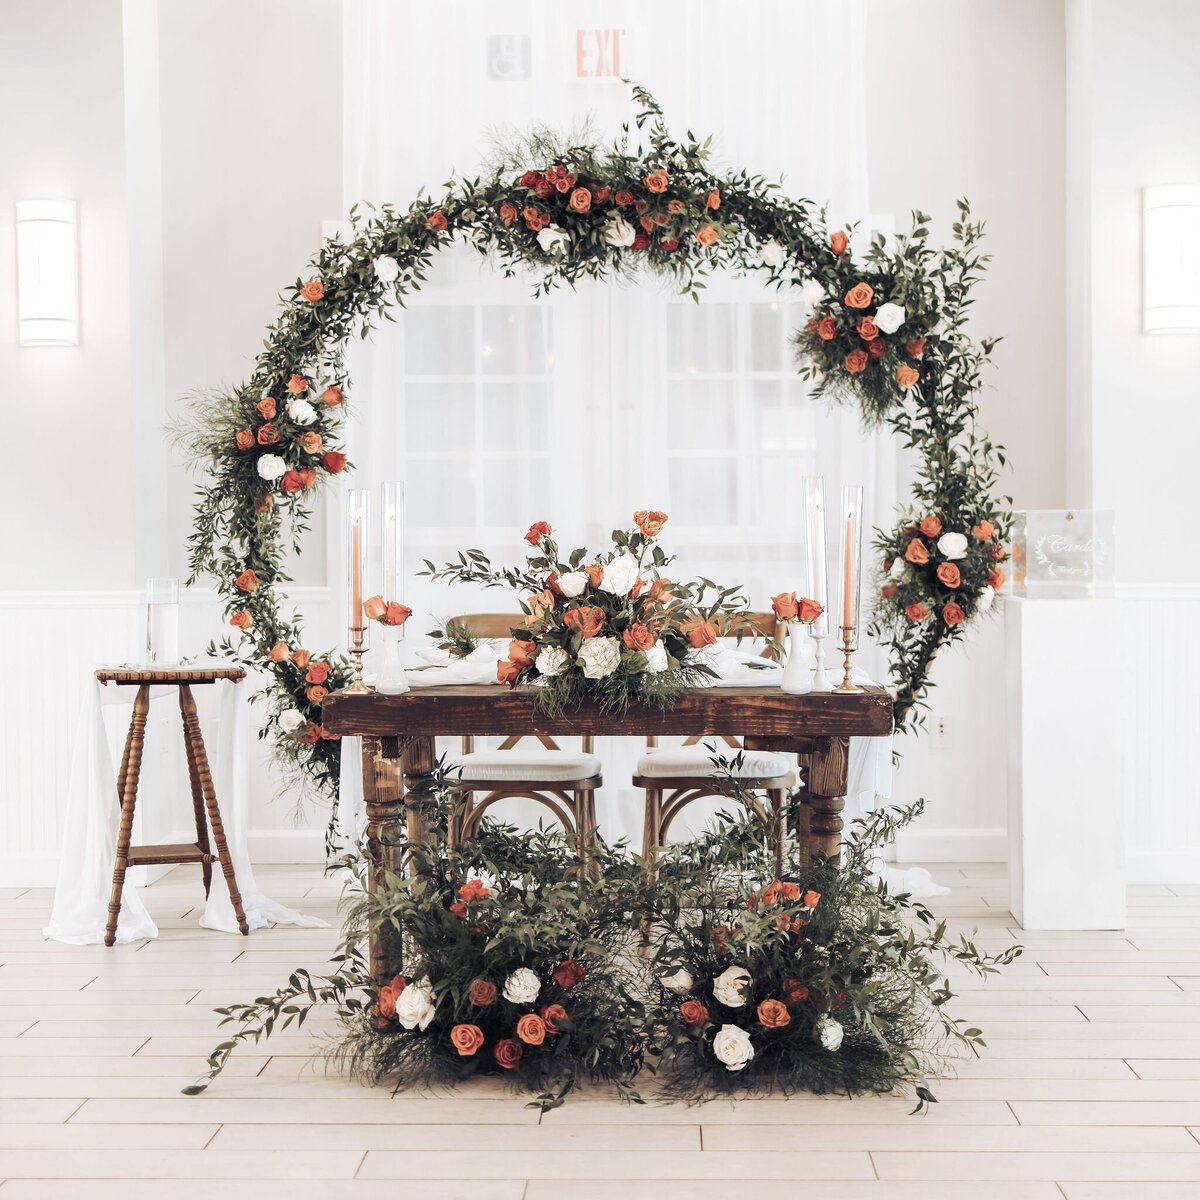 flower arch and bouquets of orange and white roses